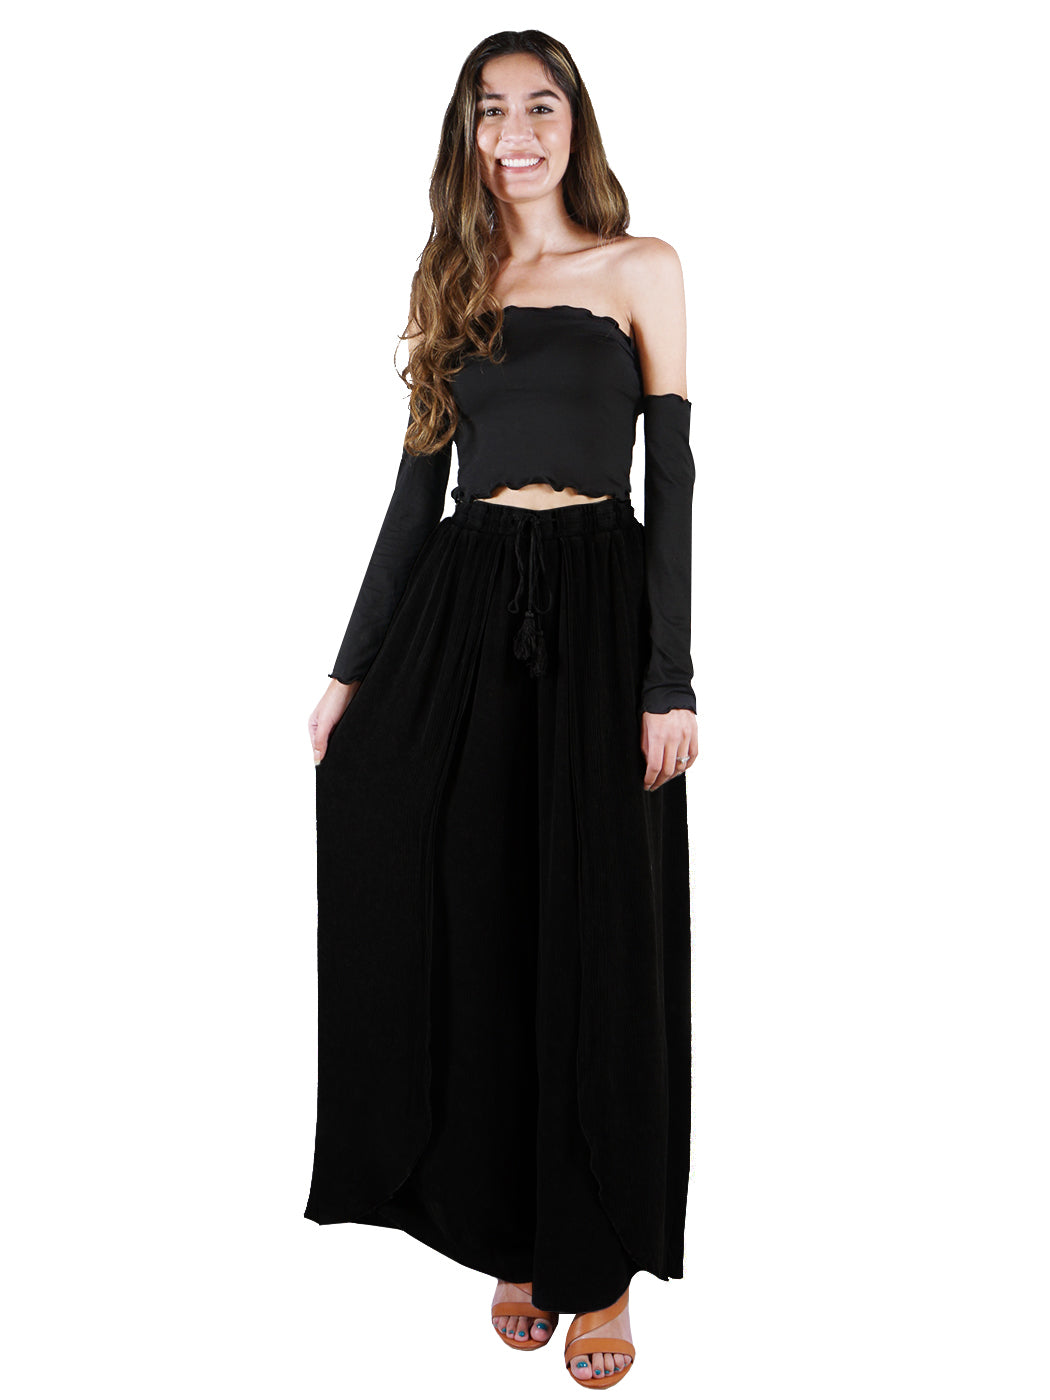 Everyday Palazzo High Waist Summer Day Pant